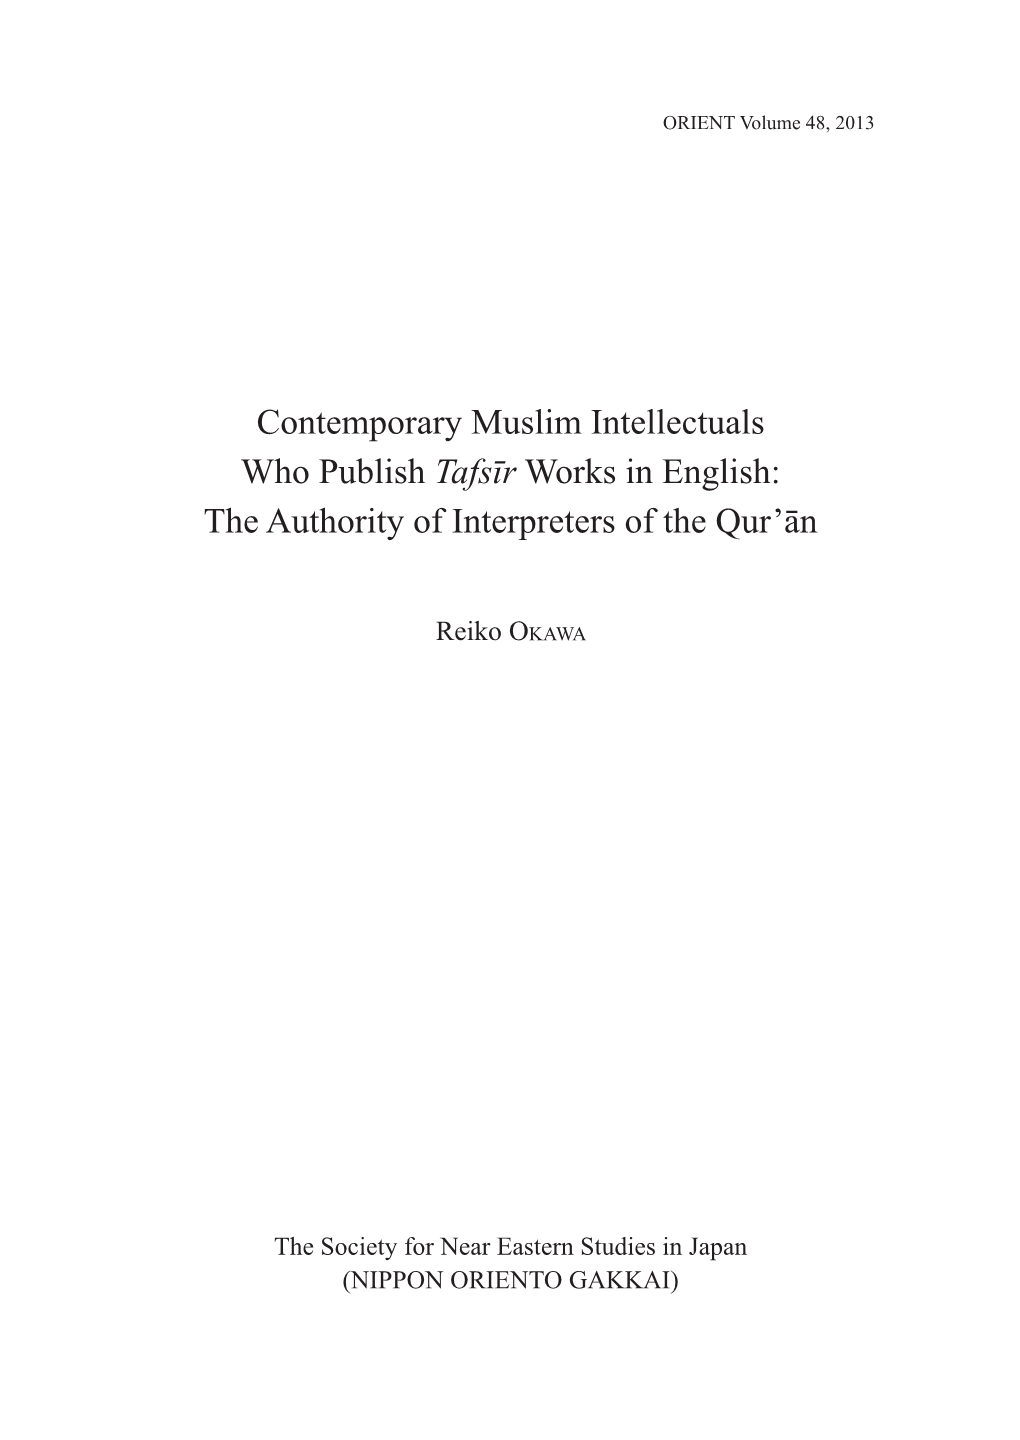 Contemporary Muslim Intellectuals Who Publish Tafsīr Works in English: the Authority of Interpreters of the Qur’Ān